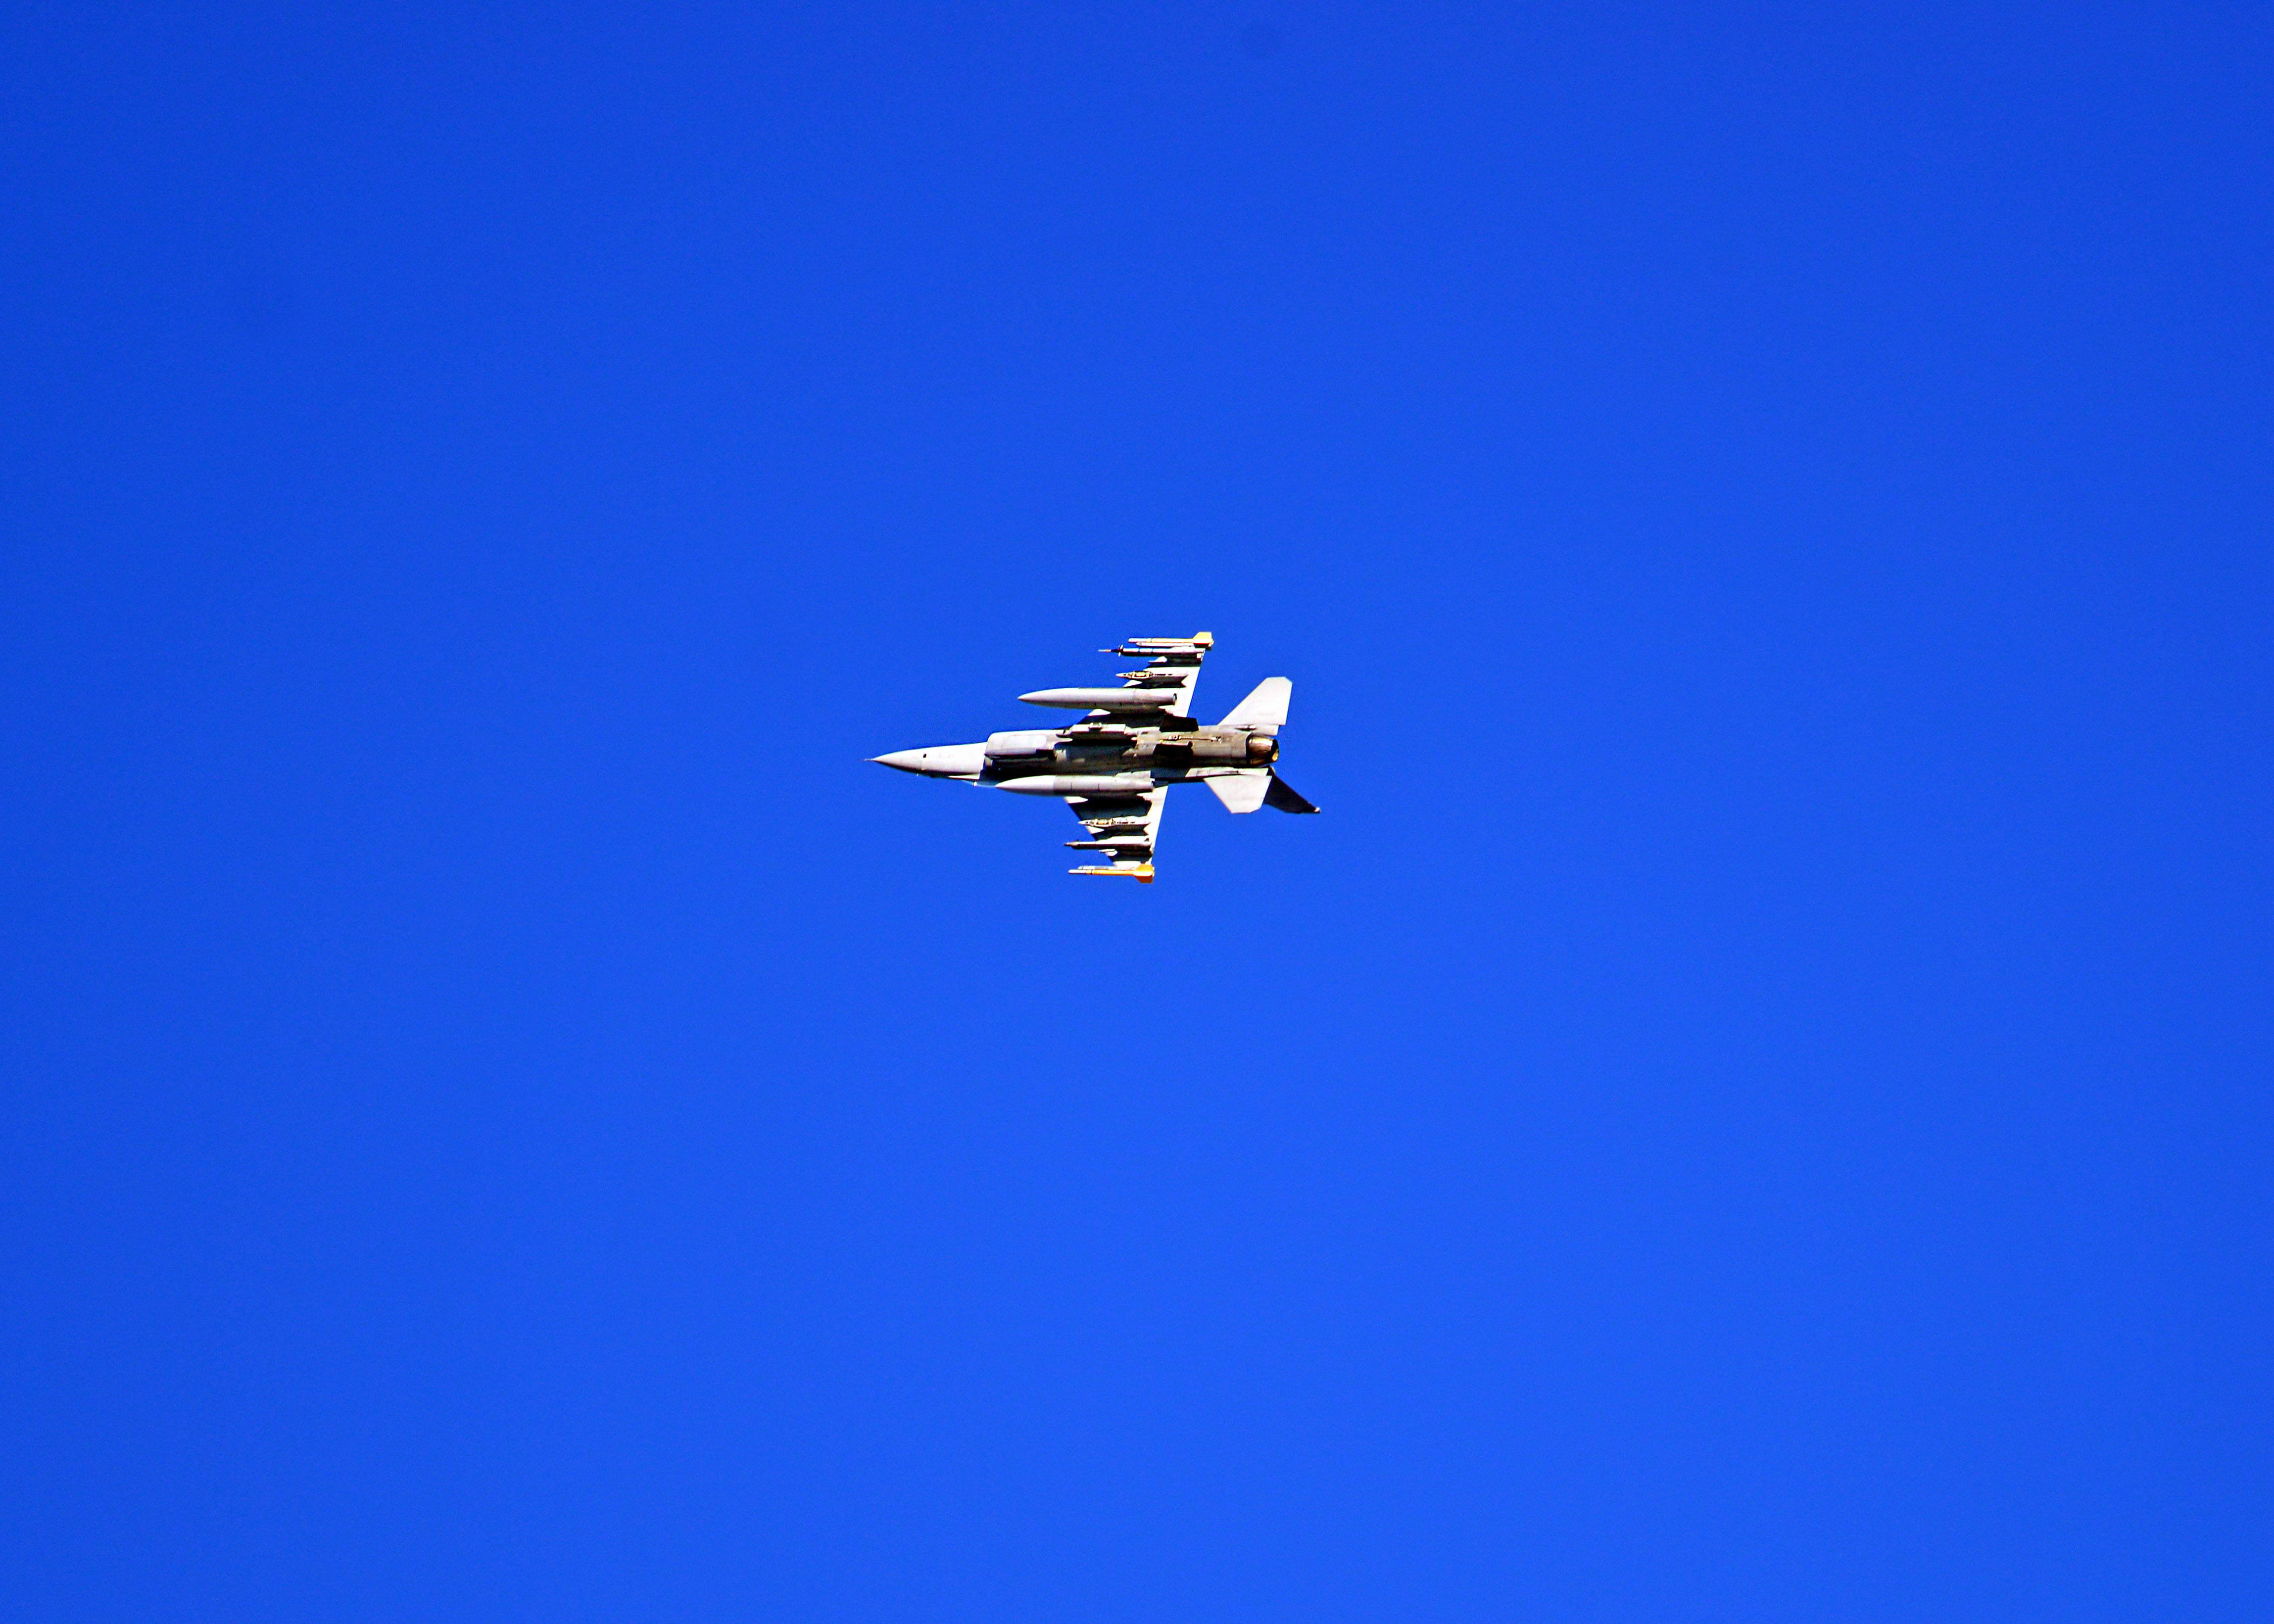 the sky, the plane, American, multifunction, F-16 Fighting Falcon